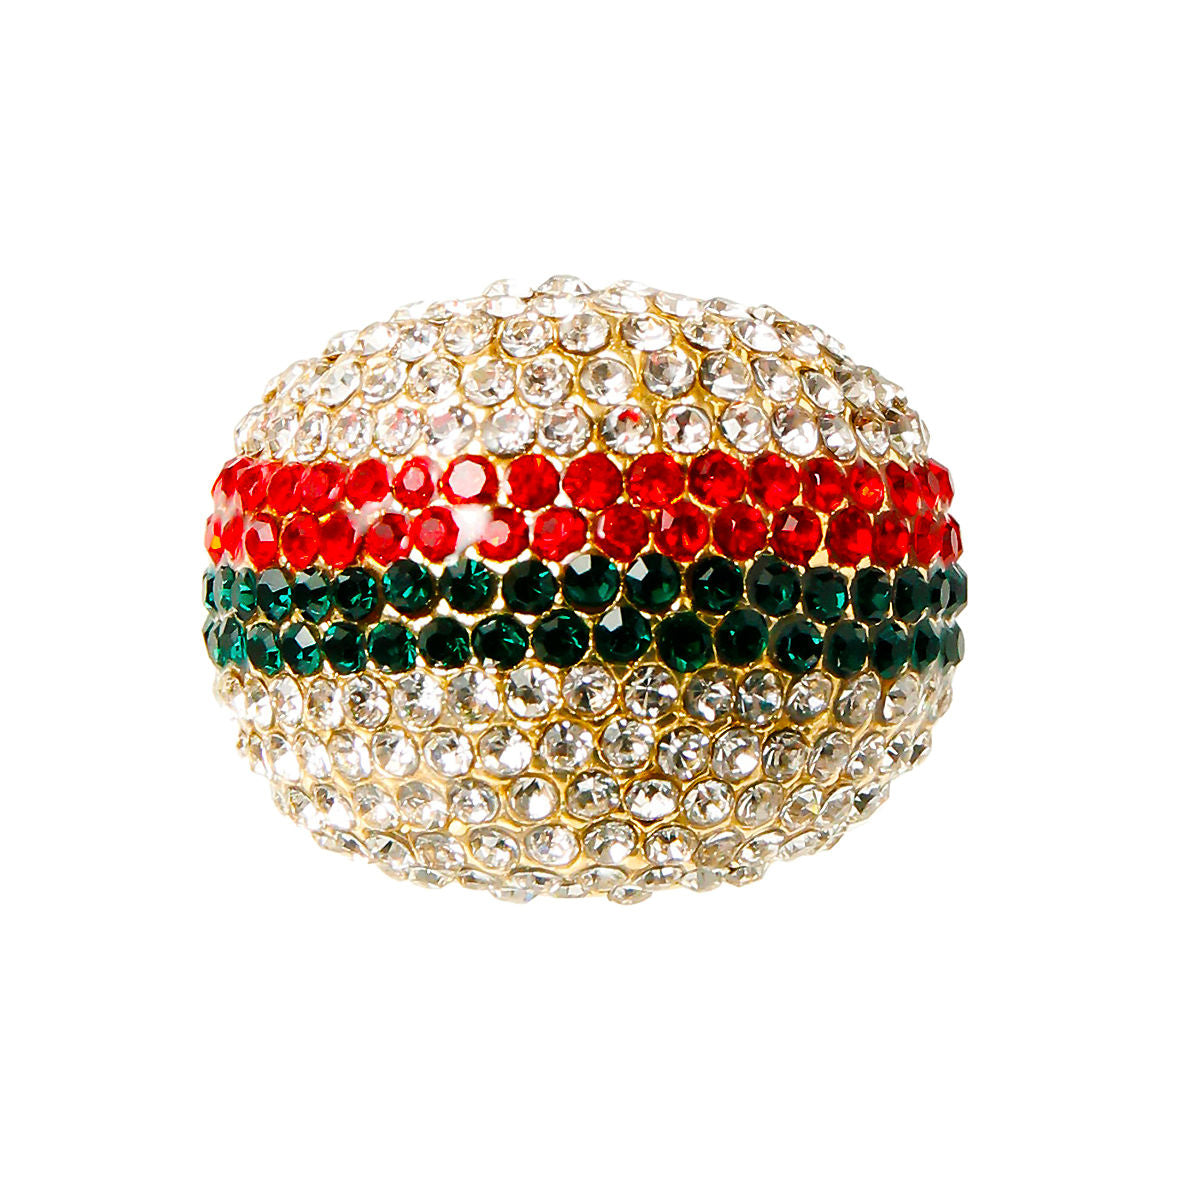 Multicolored Pave Rhinestone Dome Cocktail Ring